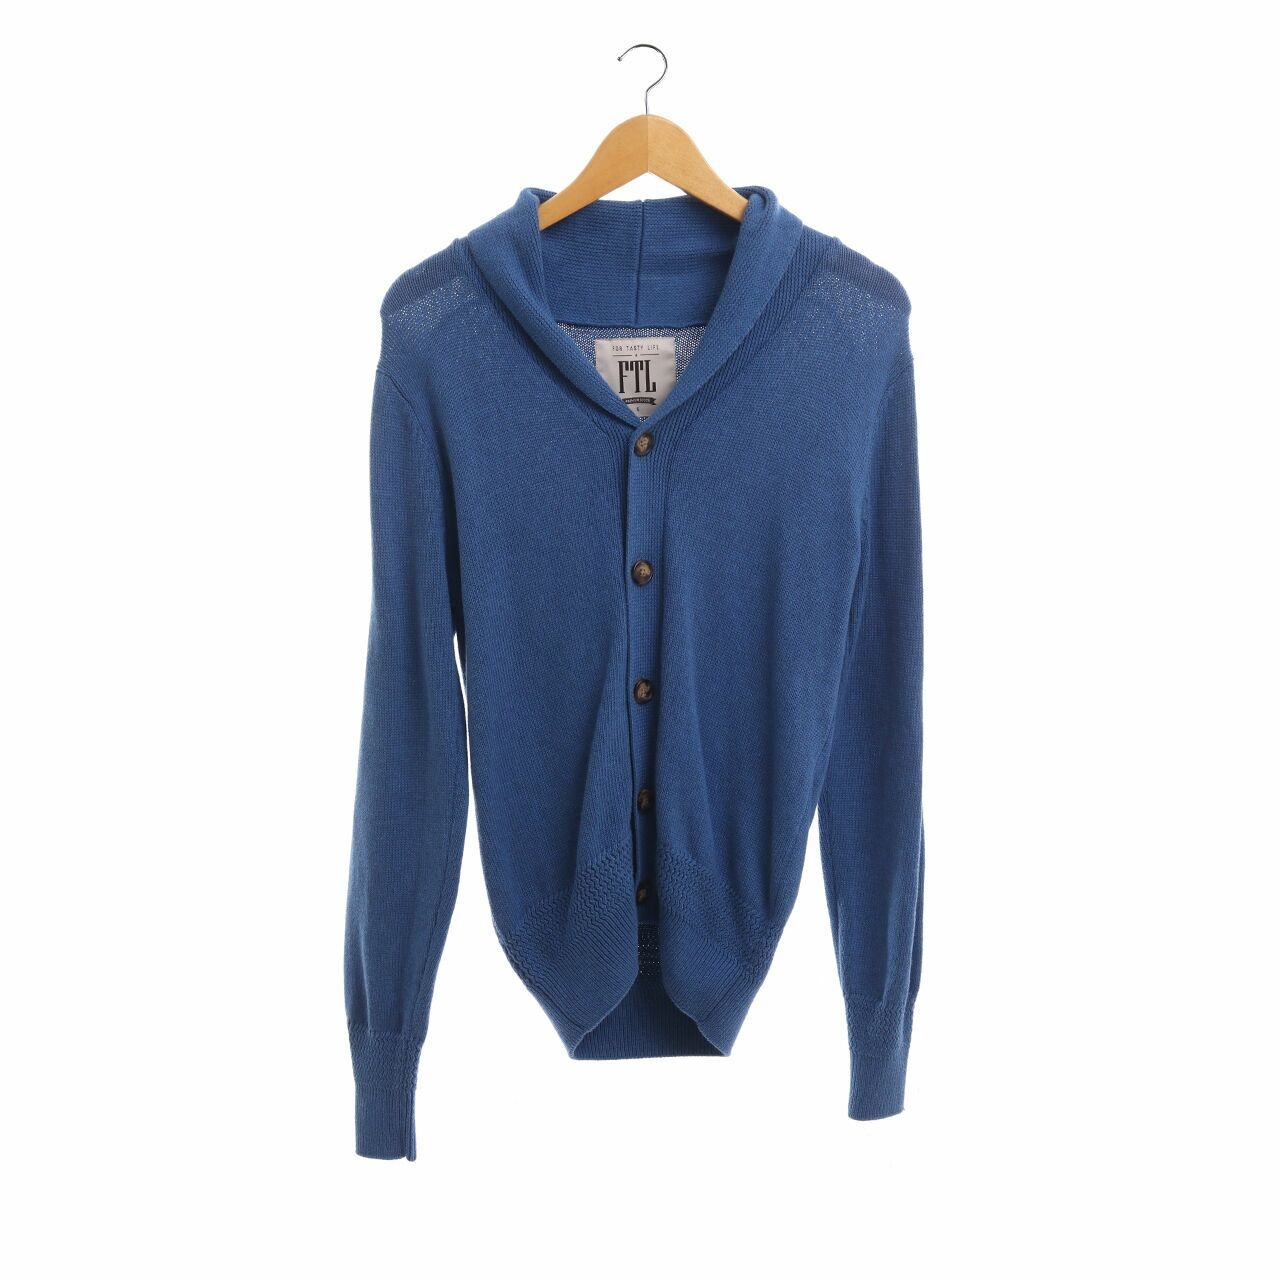 Private Collection Blue Knit Cardigan